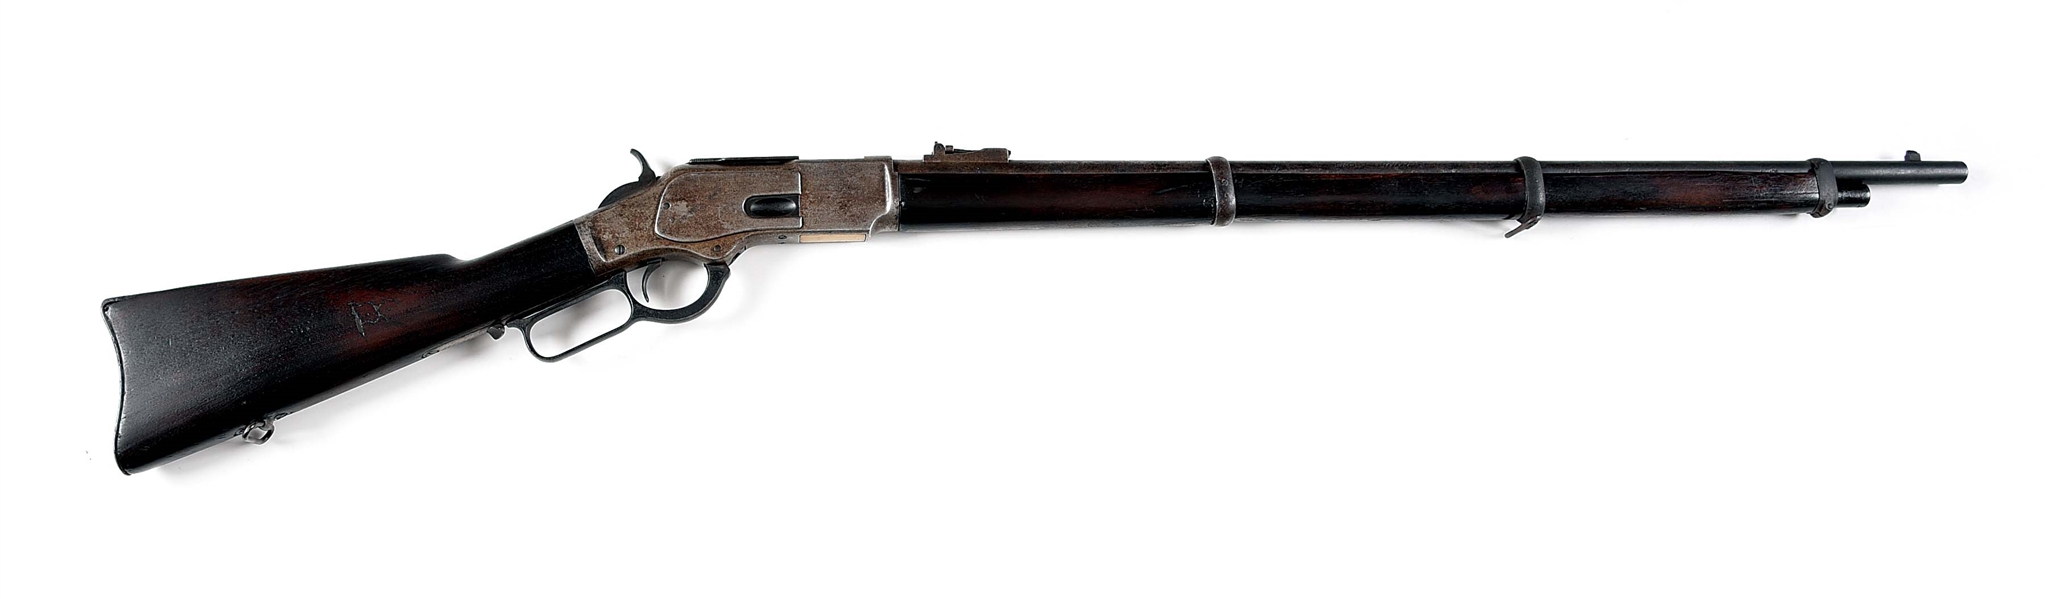 (A) WINCHESTER 1873 LEVER ACTION MUSKET. 